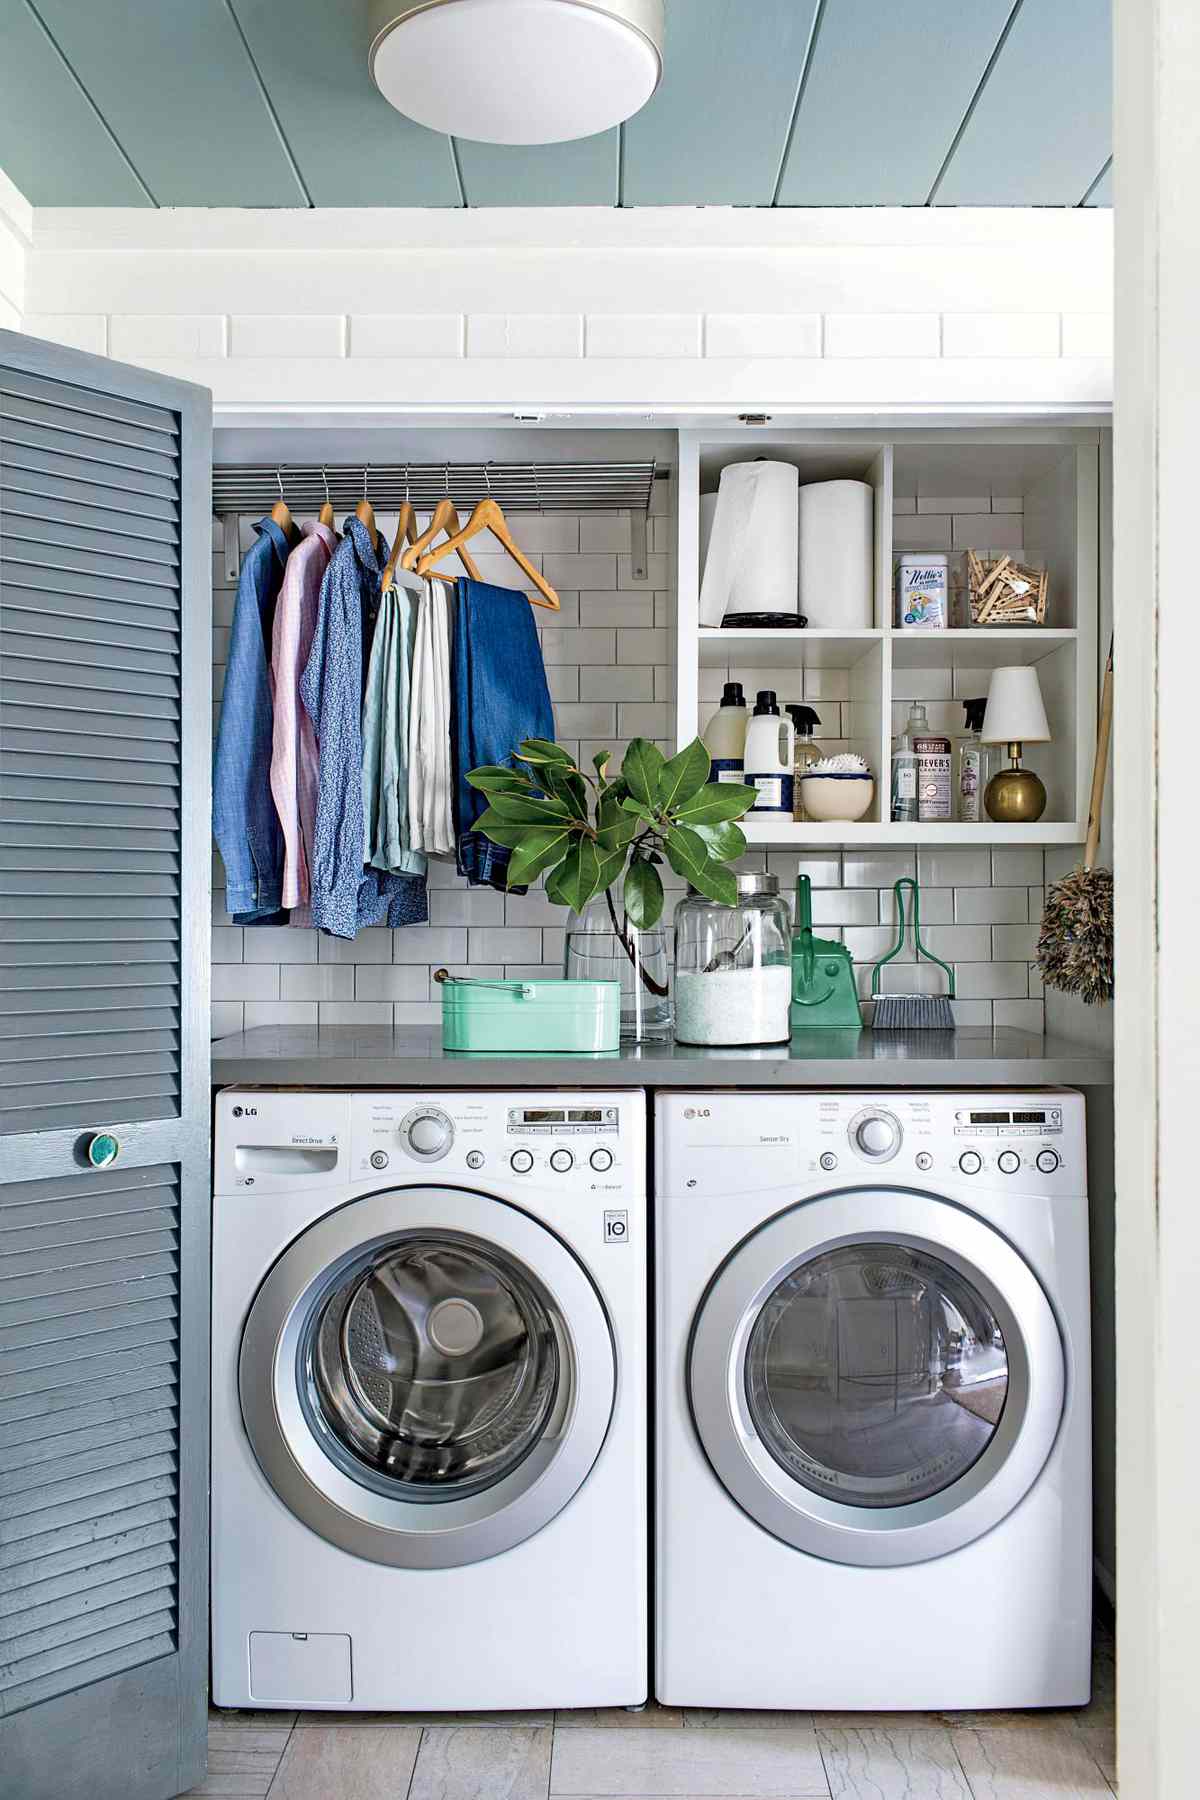 Washer and Dryer in Laundry Room